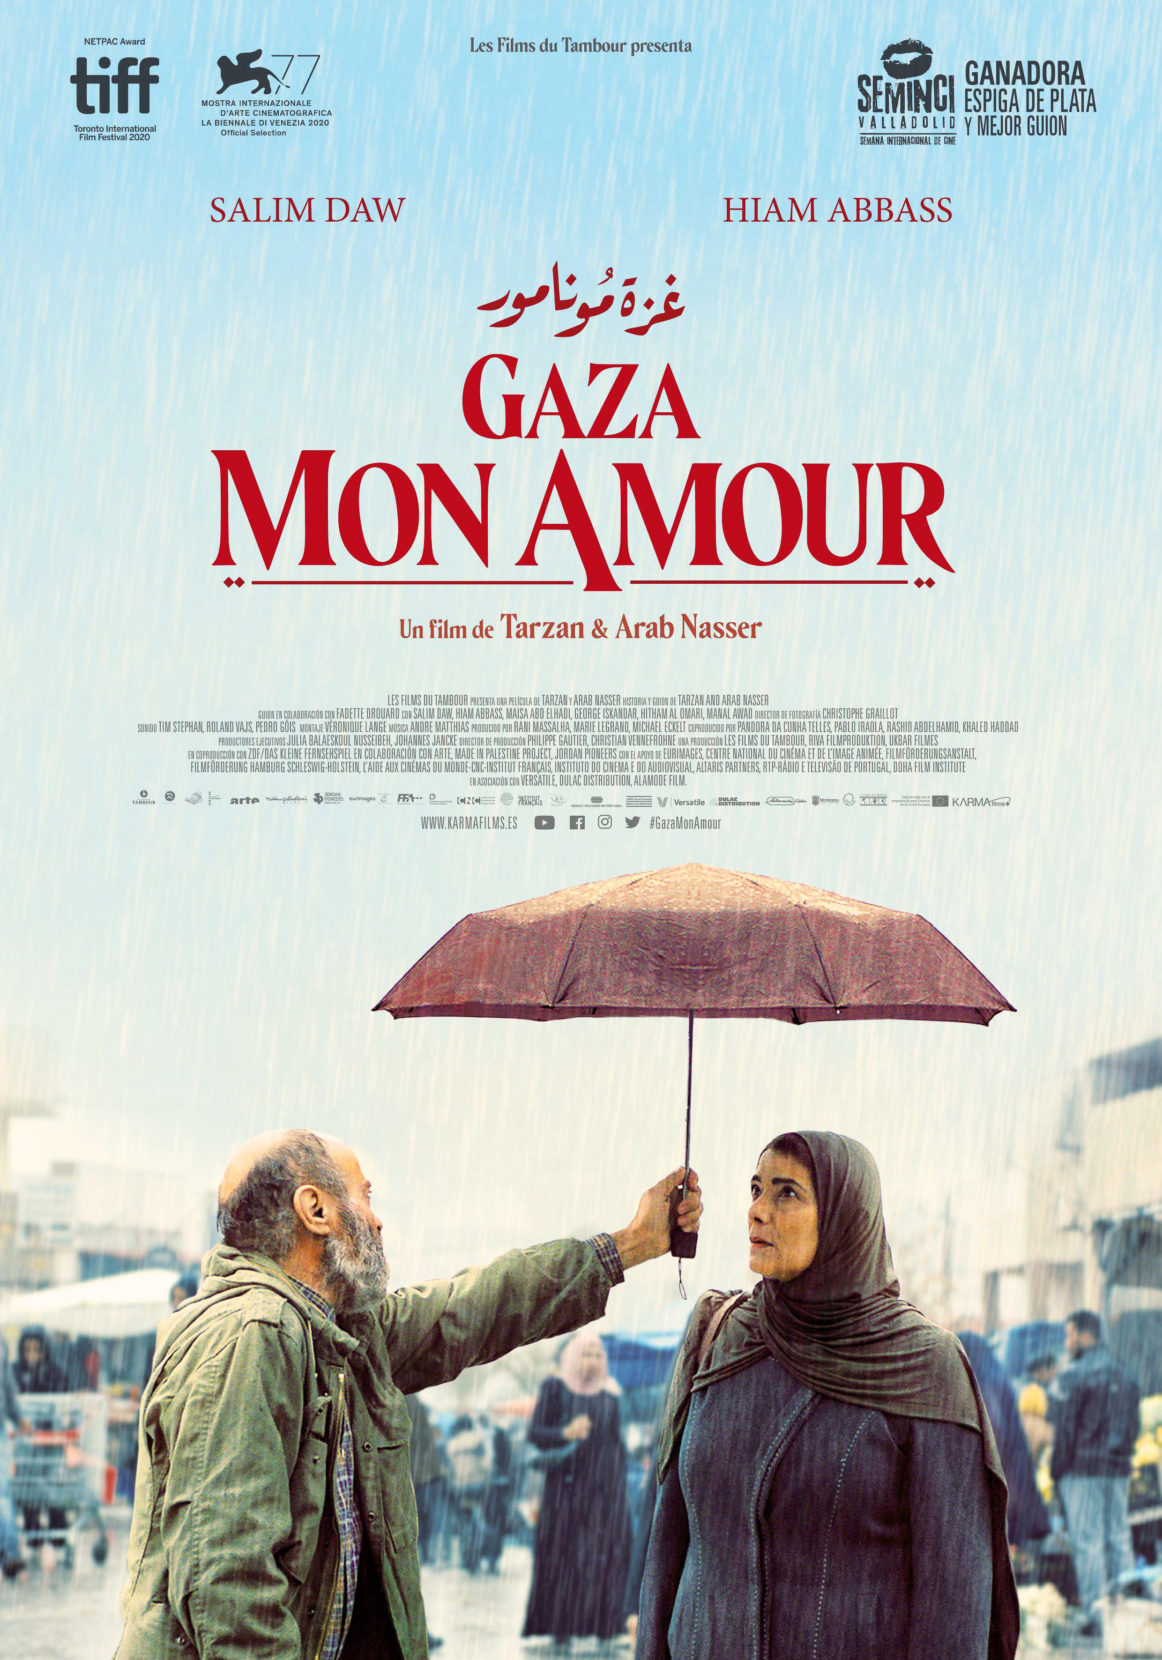 In 2020, Tarzan and Arab released their second feature film, Gaza, Mon Amour. Photo: Les Films du Tambou/Album/Alamy.